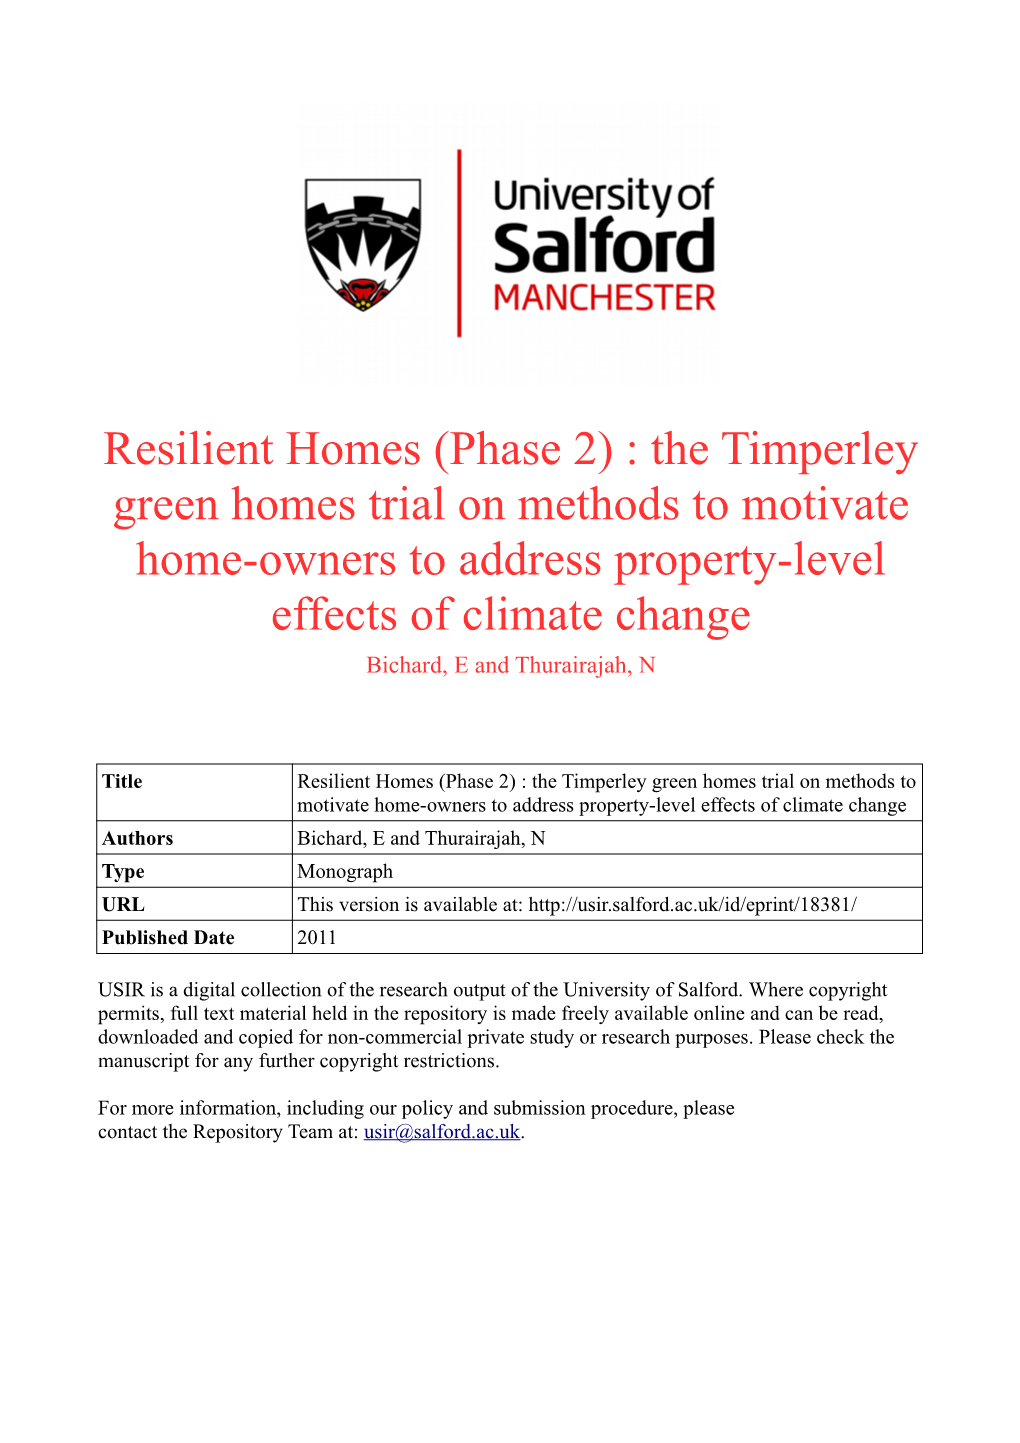 The Timperley Green Homes Trial on Methods to Motivate Home-Owners to Address Property-Level Effects of Climate Change Bichard, E and Thurairajah, N